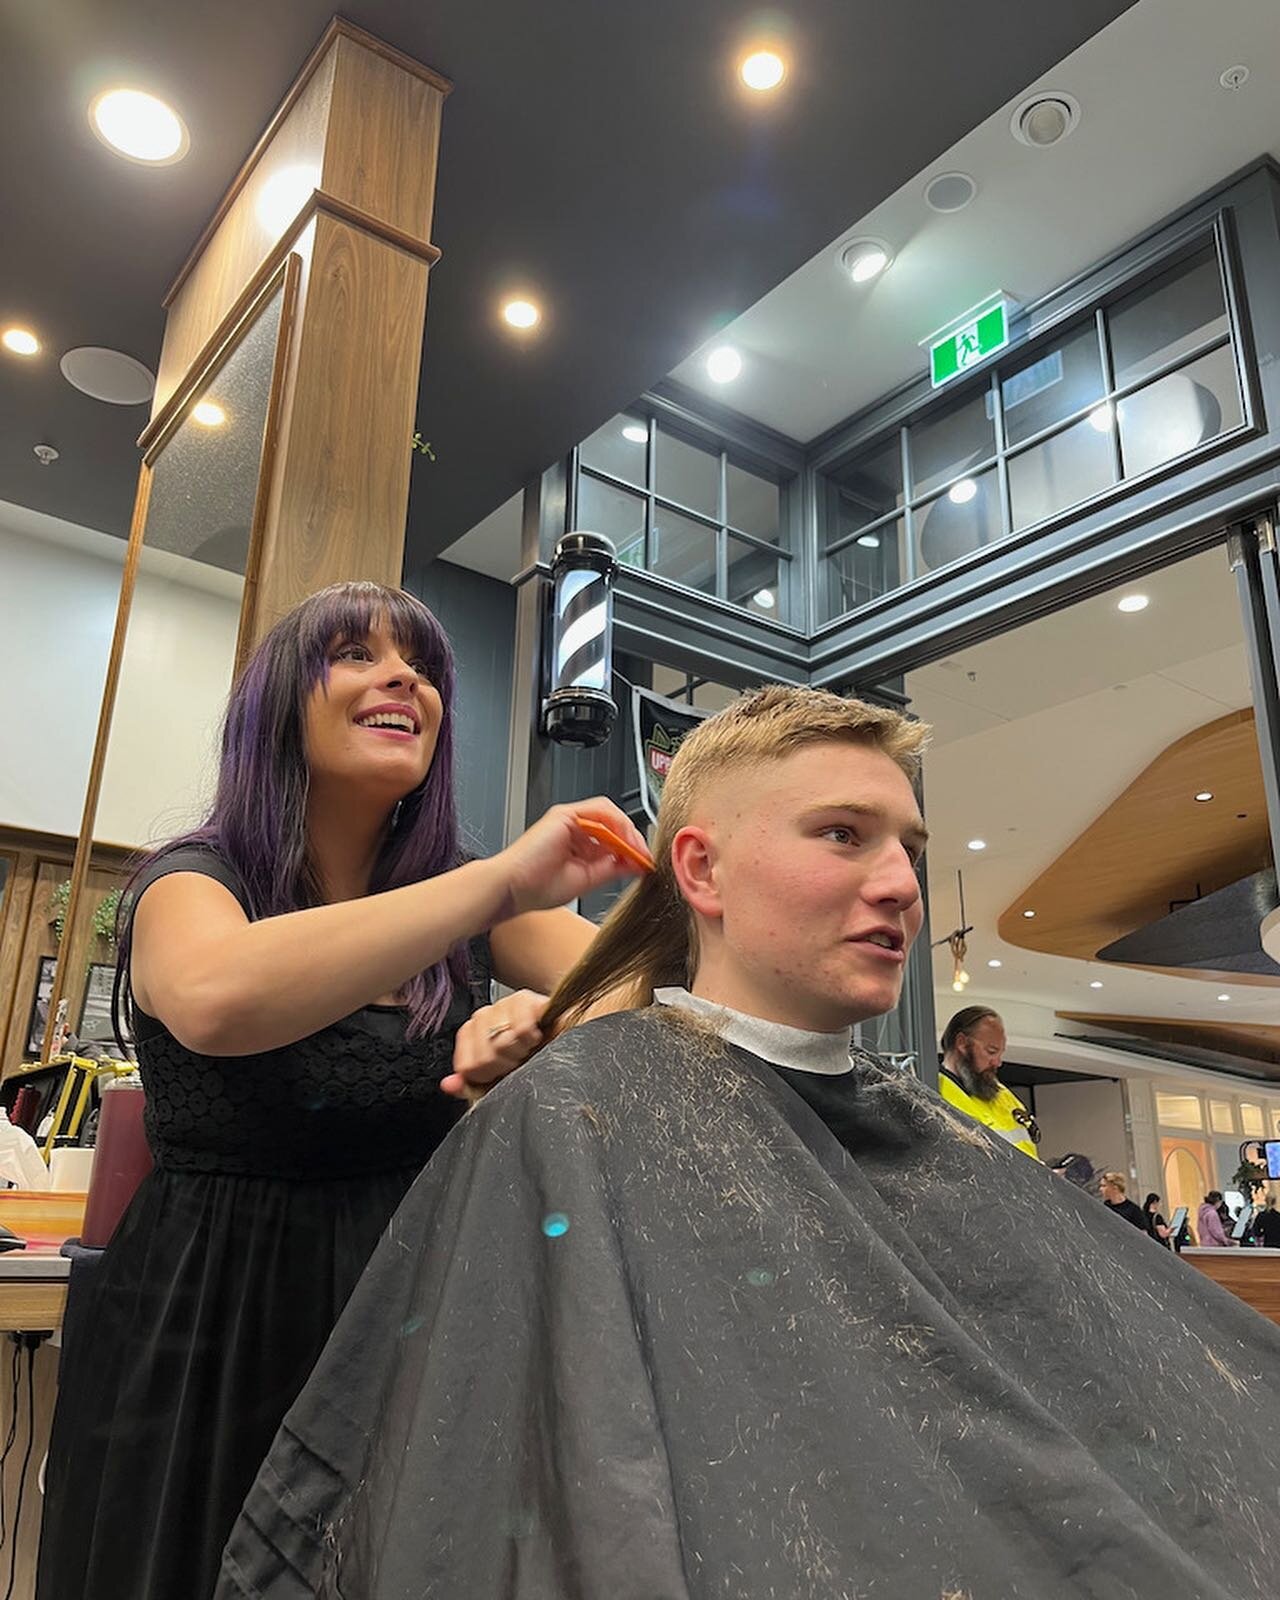 A happy client always means a happy team at Barbershop Express! It&rsquo;s all smiles after this mullet cut by one of our barbers at Barbershop Express Midland. 💈

#Men&rsquo;sGroomingDoneBetter #BarbershopExpressAU #Mullet